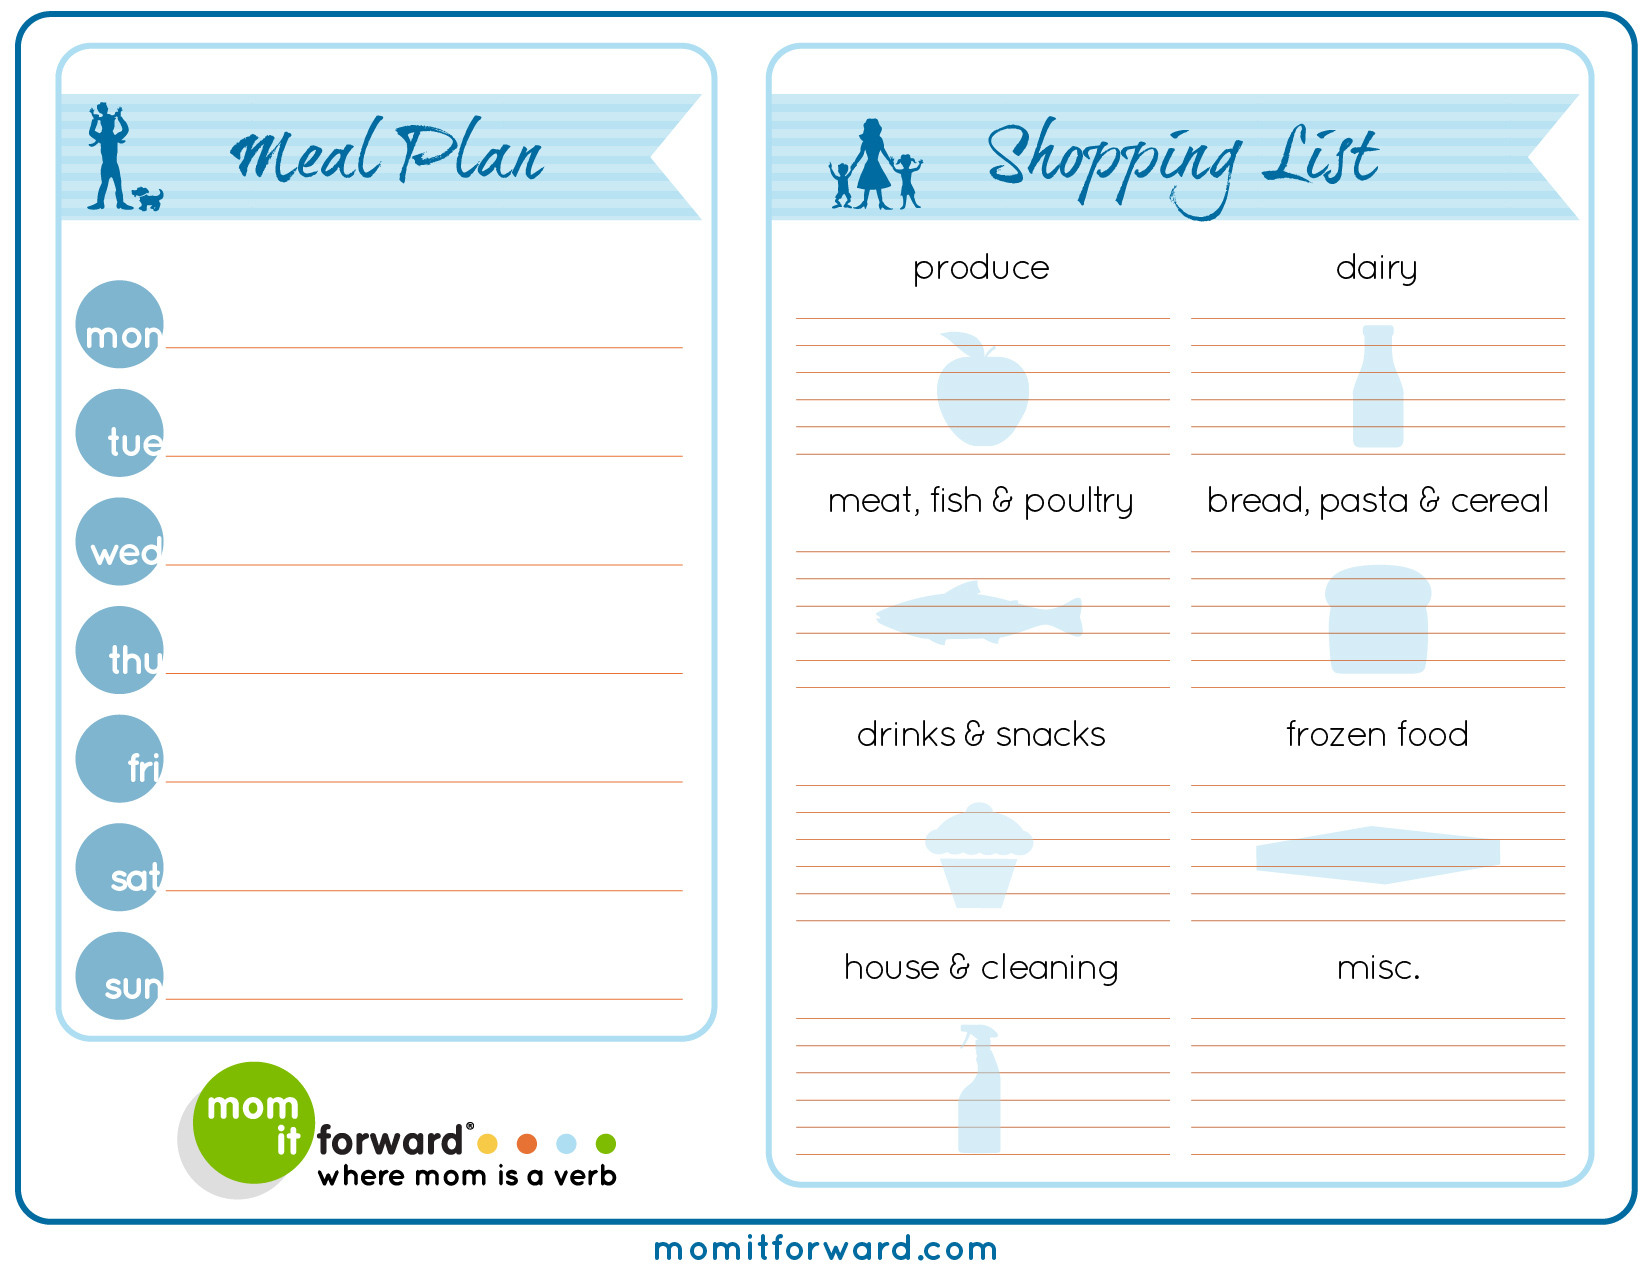 Meal Plan Worksheet Printable  Mom It Forrdmom It Forrd